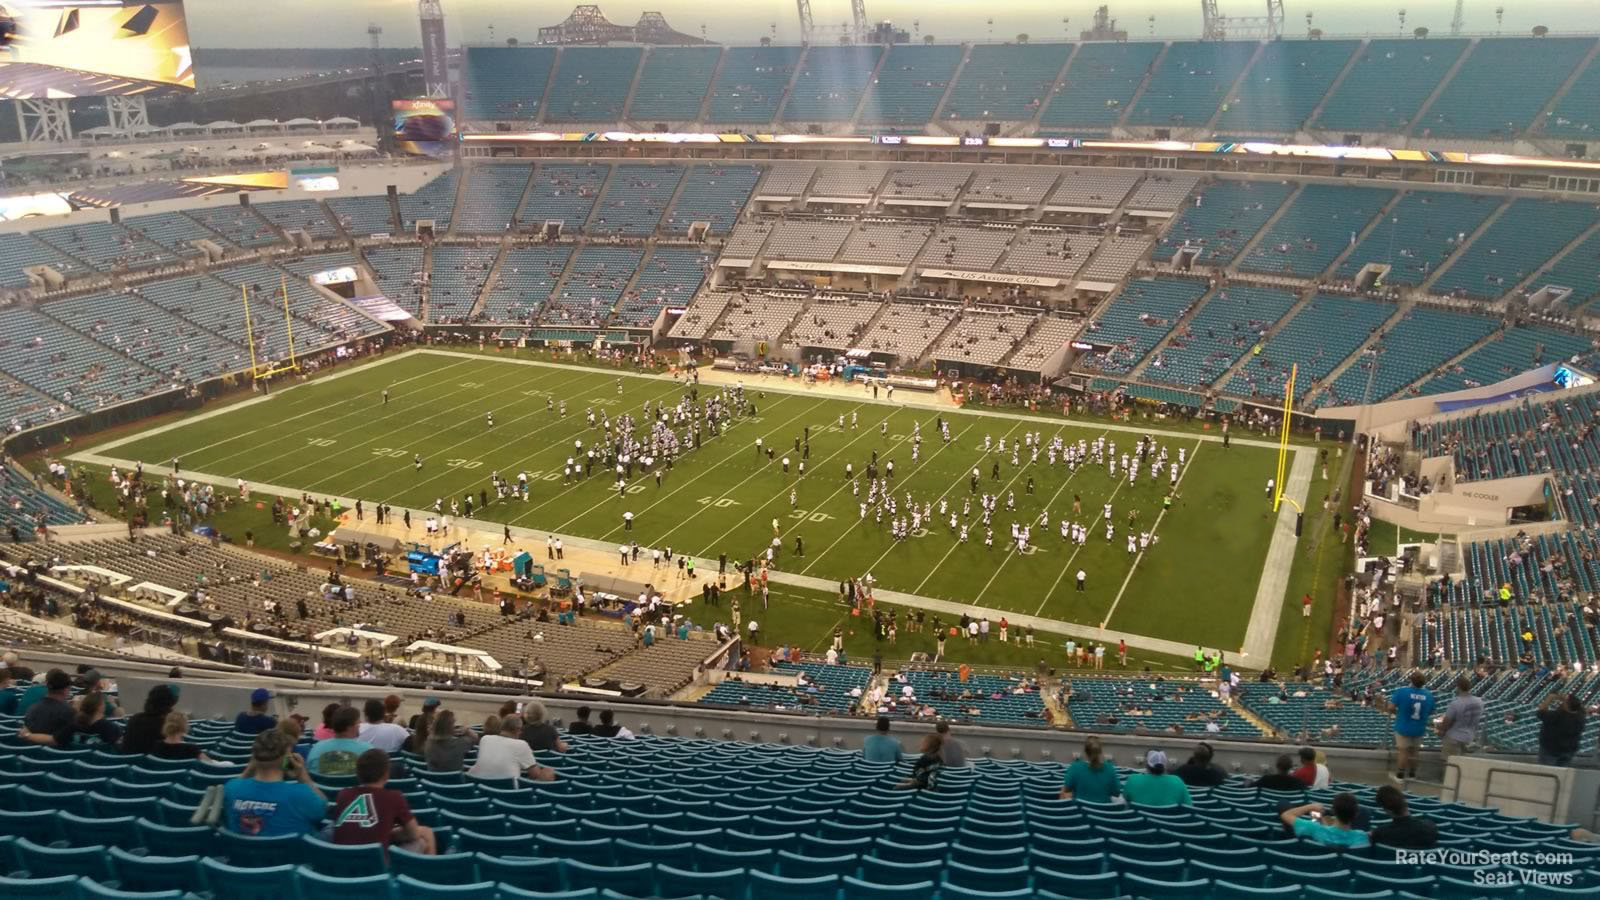 section 405, row bb seat view  - tiaa bank field